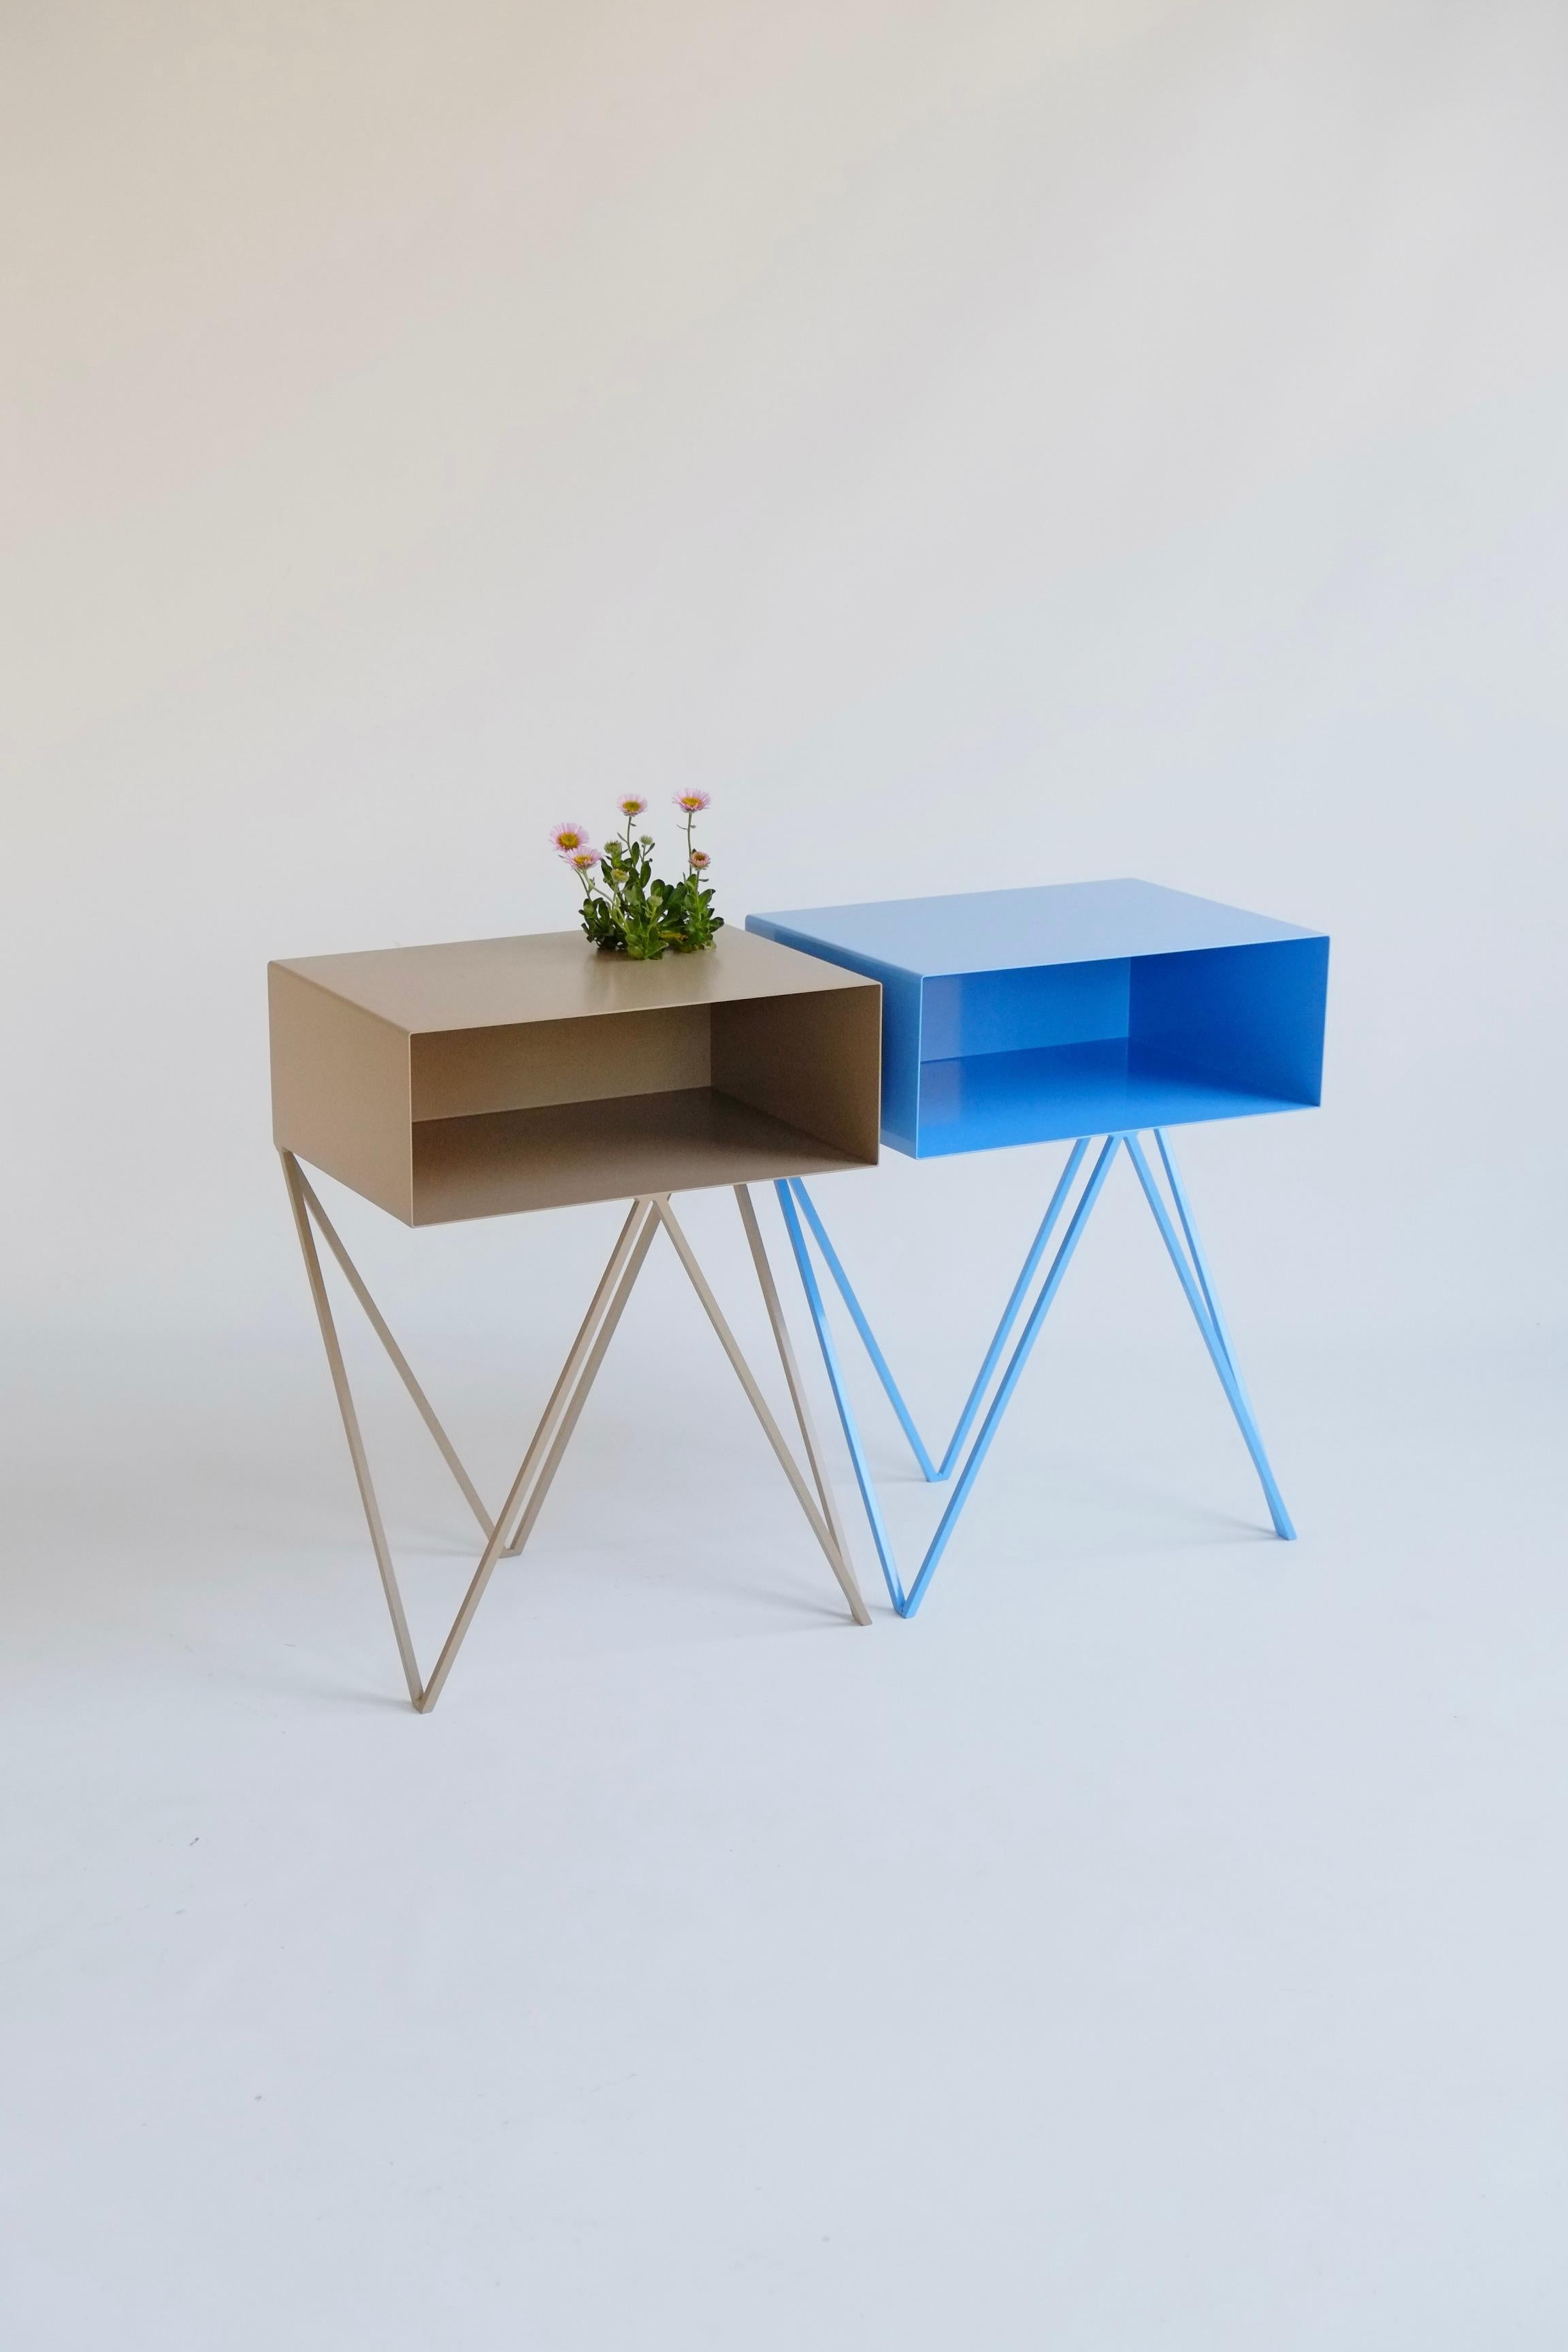 A beautiful pair of mismatched ice blue and coco Robot bedside tables. The Robot side table features an open shelf on zig zag legs. A fun and functional design made of solid steel, one is powder-coated in ice blue and the other in coco. The clean